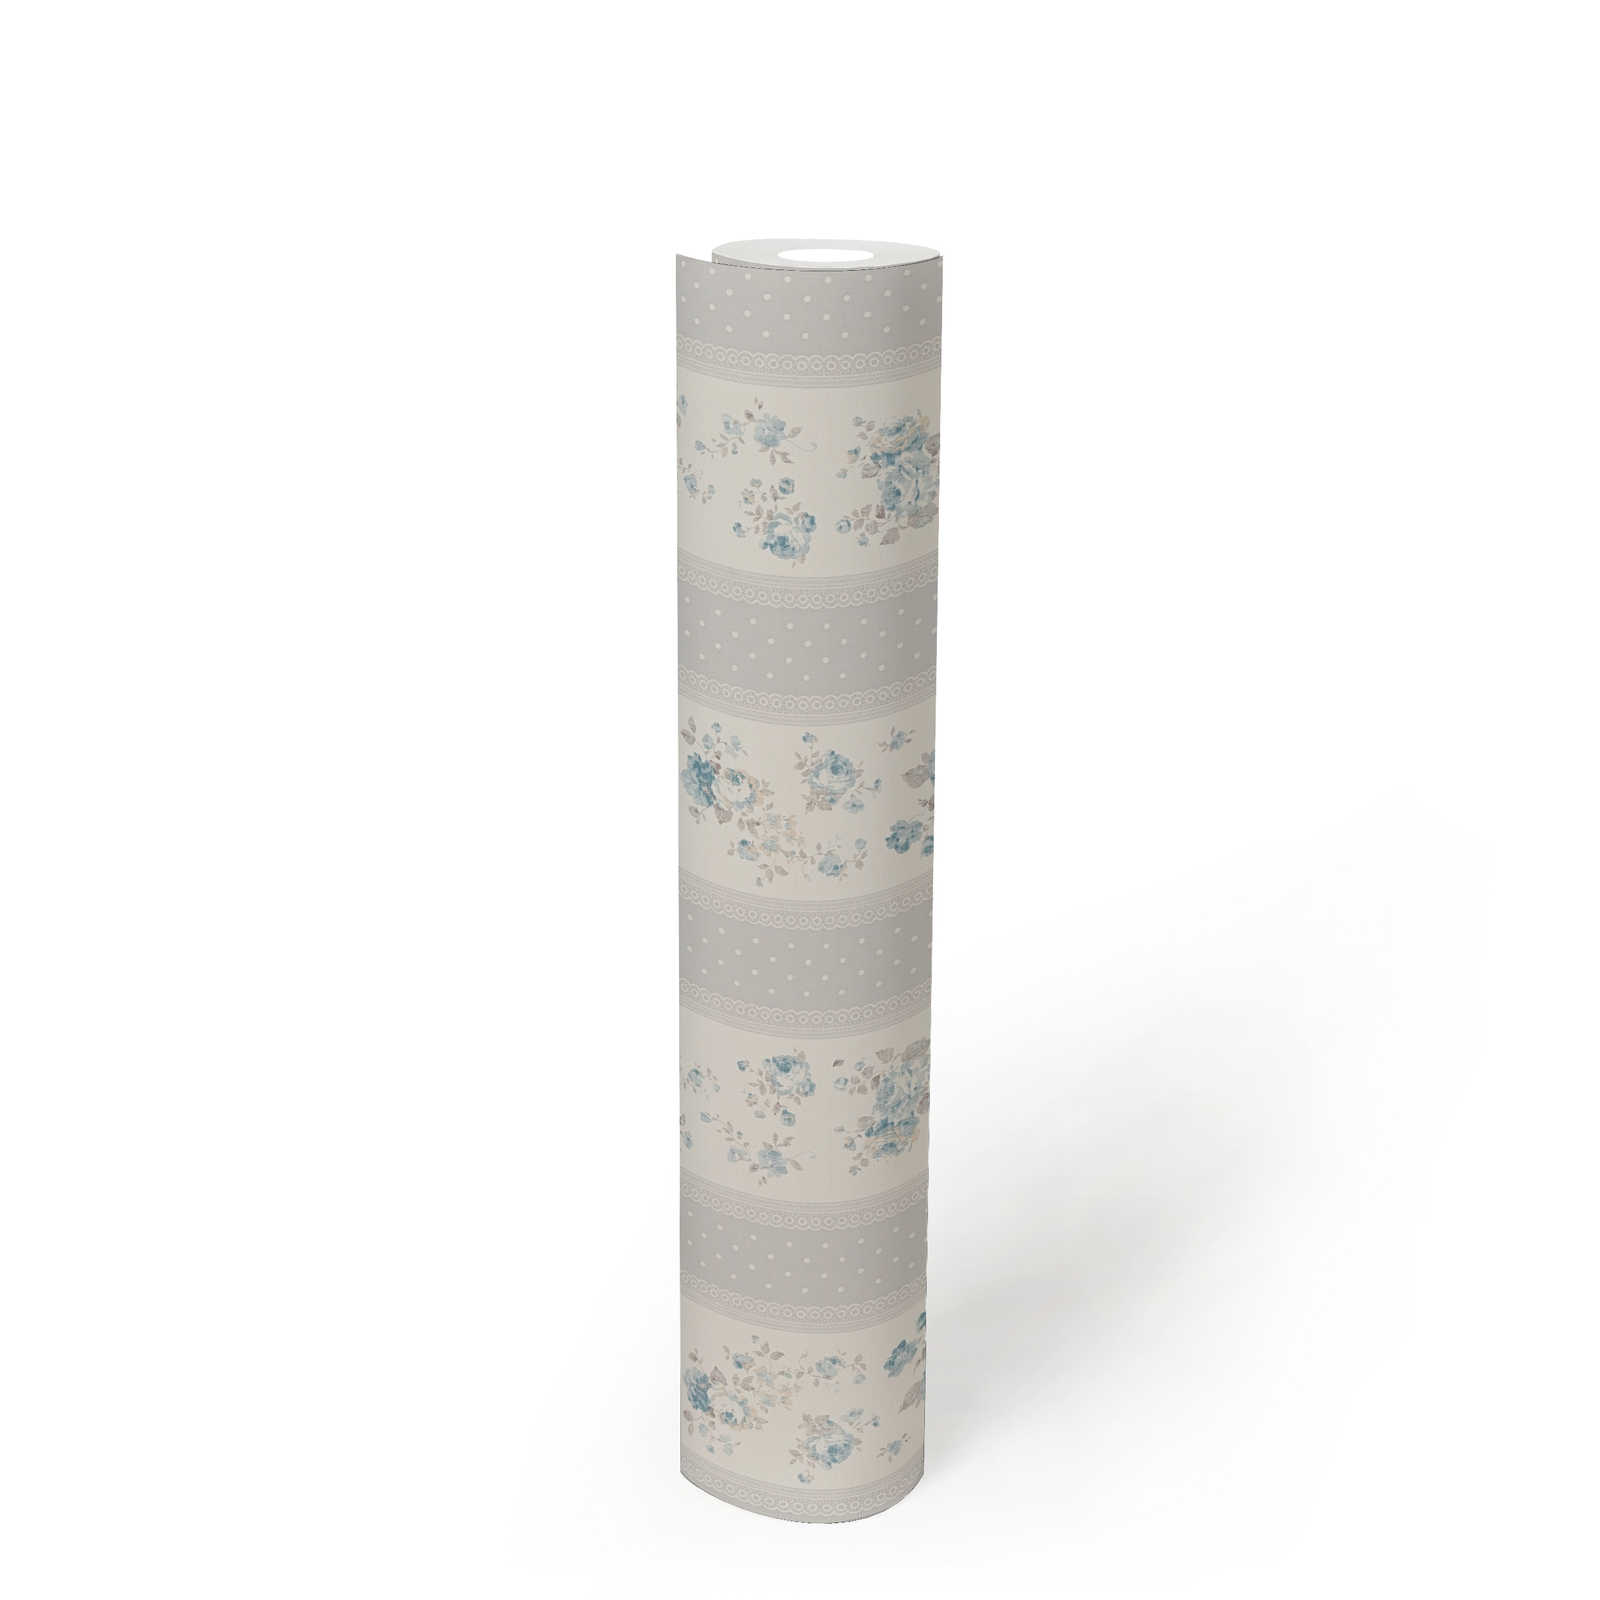             Non-woven wallpaper with dotted and floral stripes - grey, white, blue
        